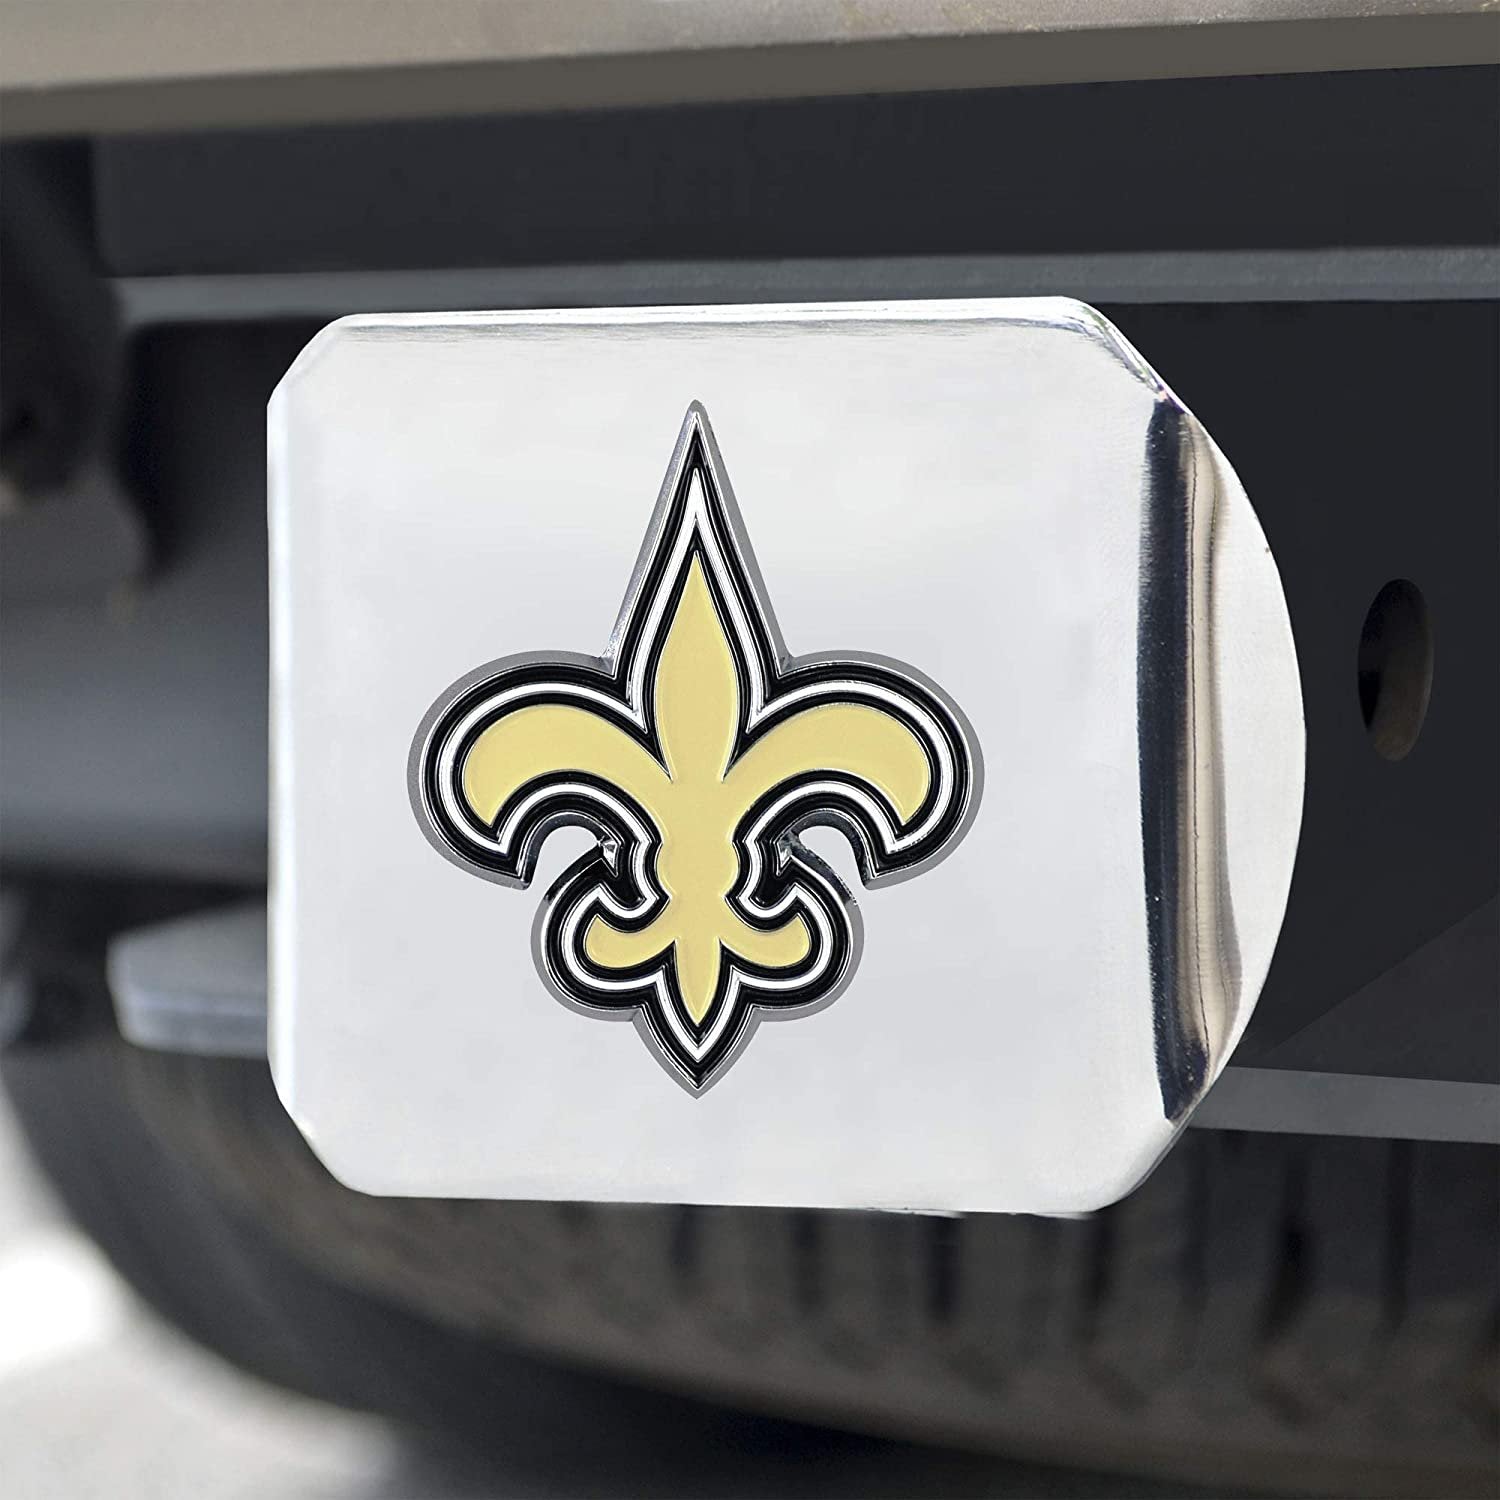 New Orleans Saints Hitch Cover Solid Metal with Raised Color Metal Emblem 2" Square Type III